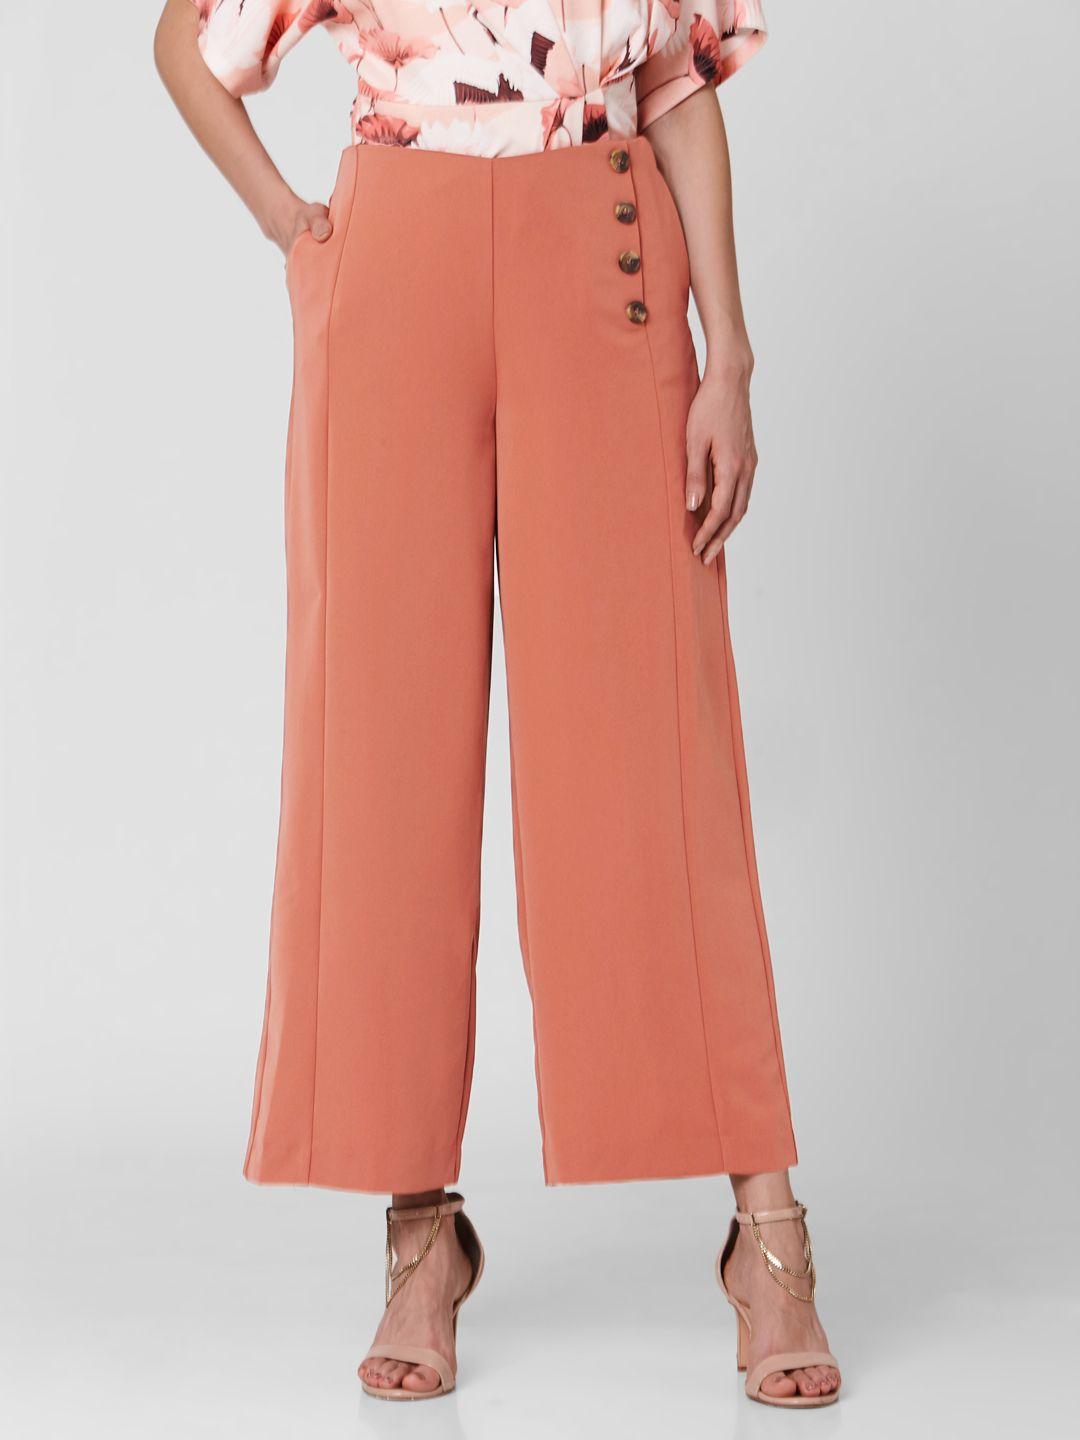 vero moda marquee collection women rust red regular fit solid parallel trousers